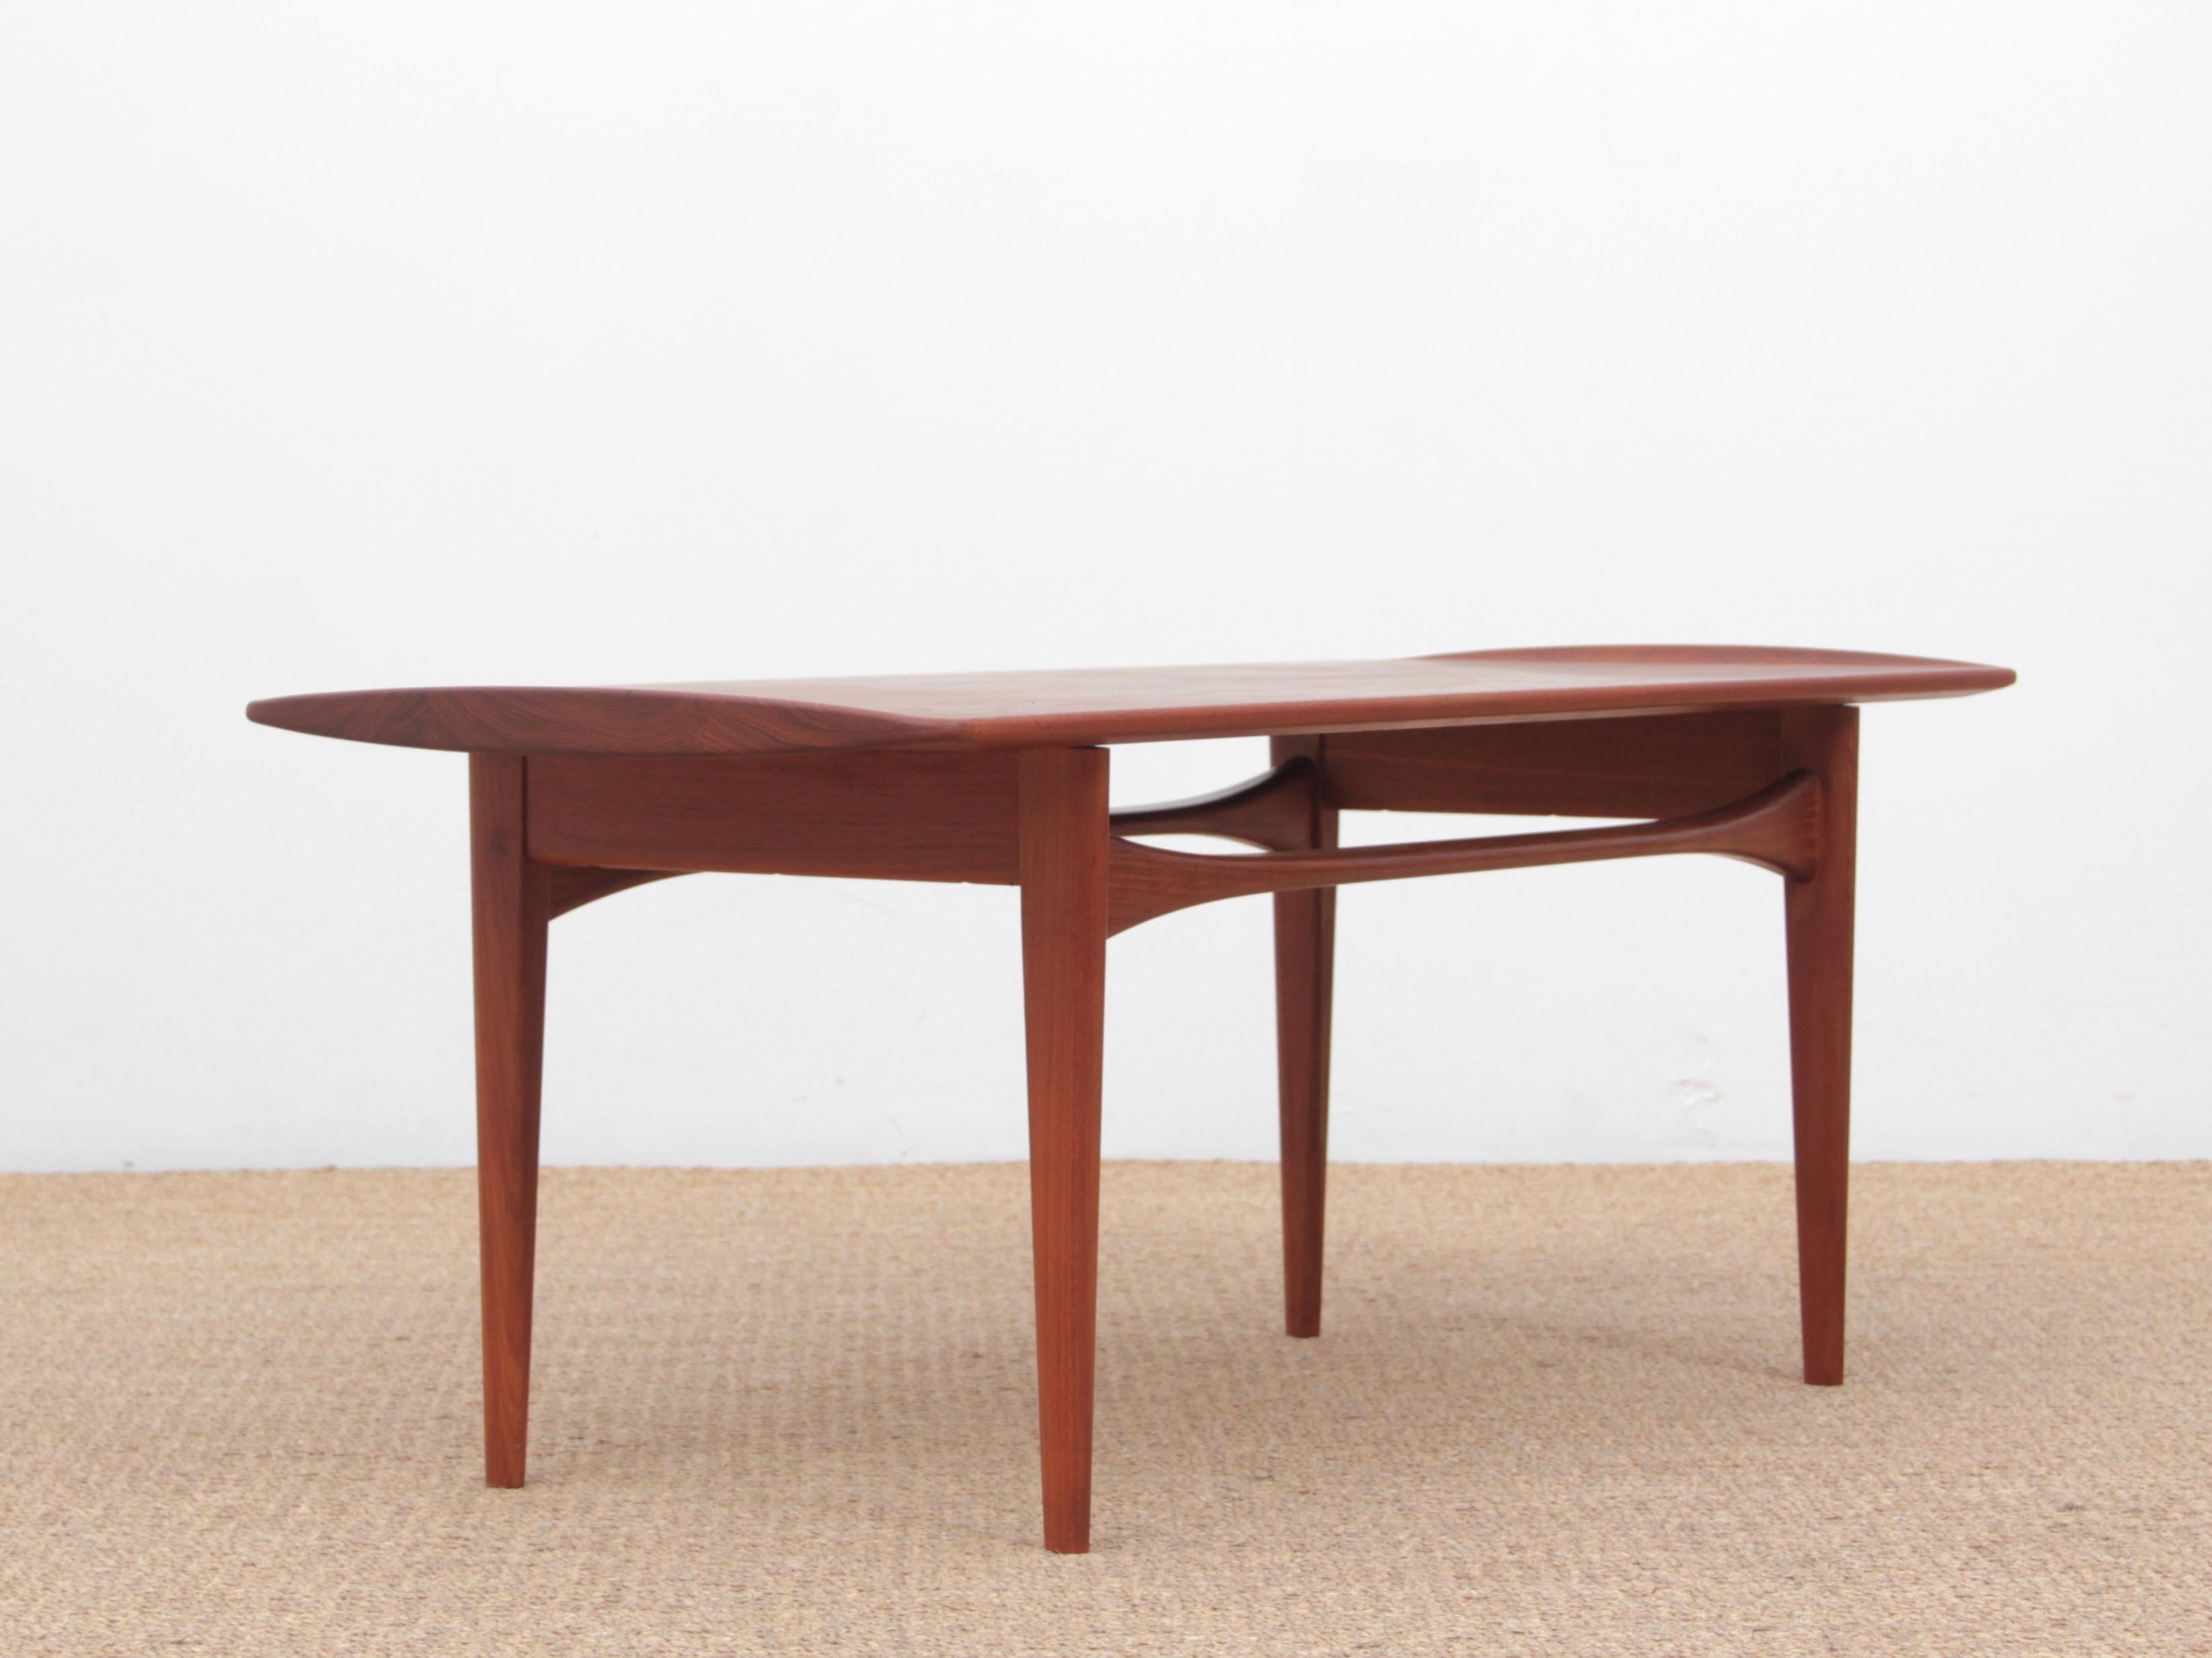 Scandinavian coffee table in teak designed by Kindt-larsen for France and Daverkosen. First edition from 1955, solid teak top. Referenced by the Design Museum Denmark under number RP00835. Bibliography : France & Daverkosen catalog 1956/57, The